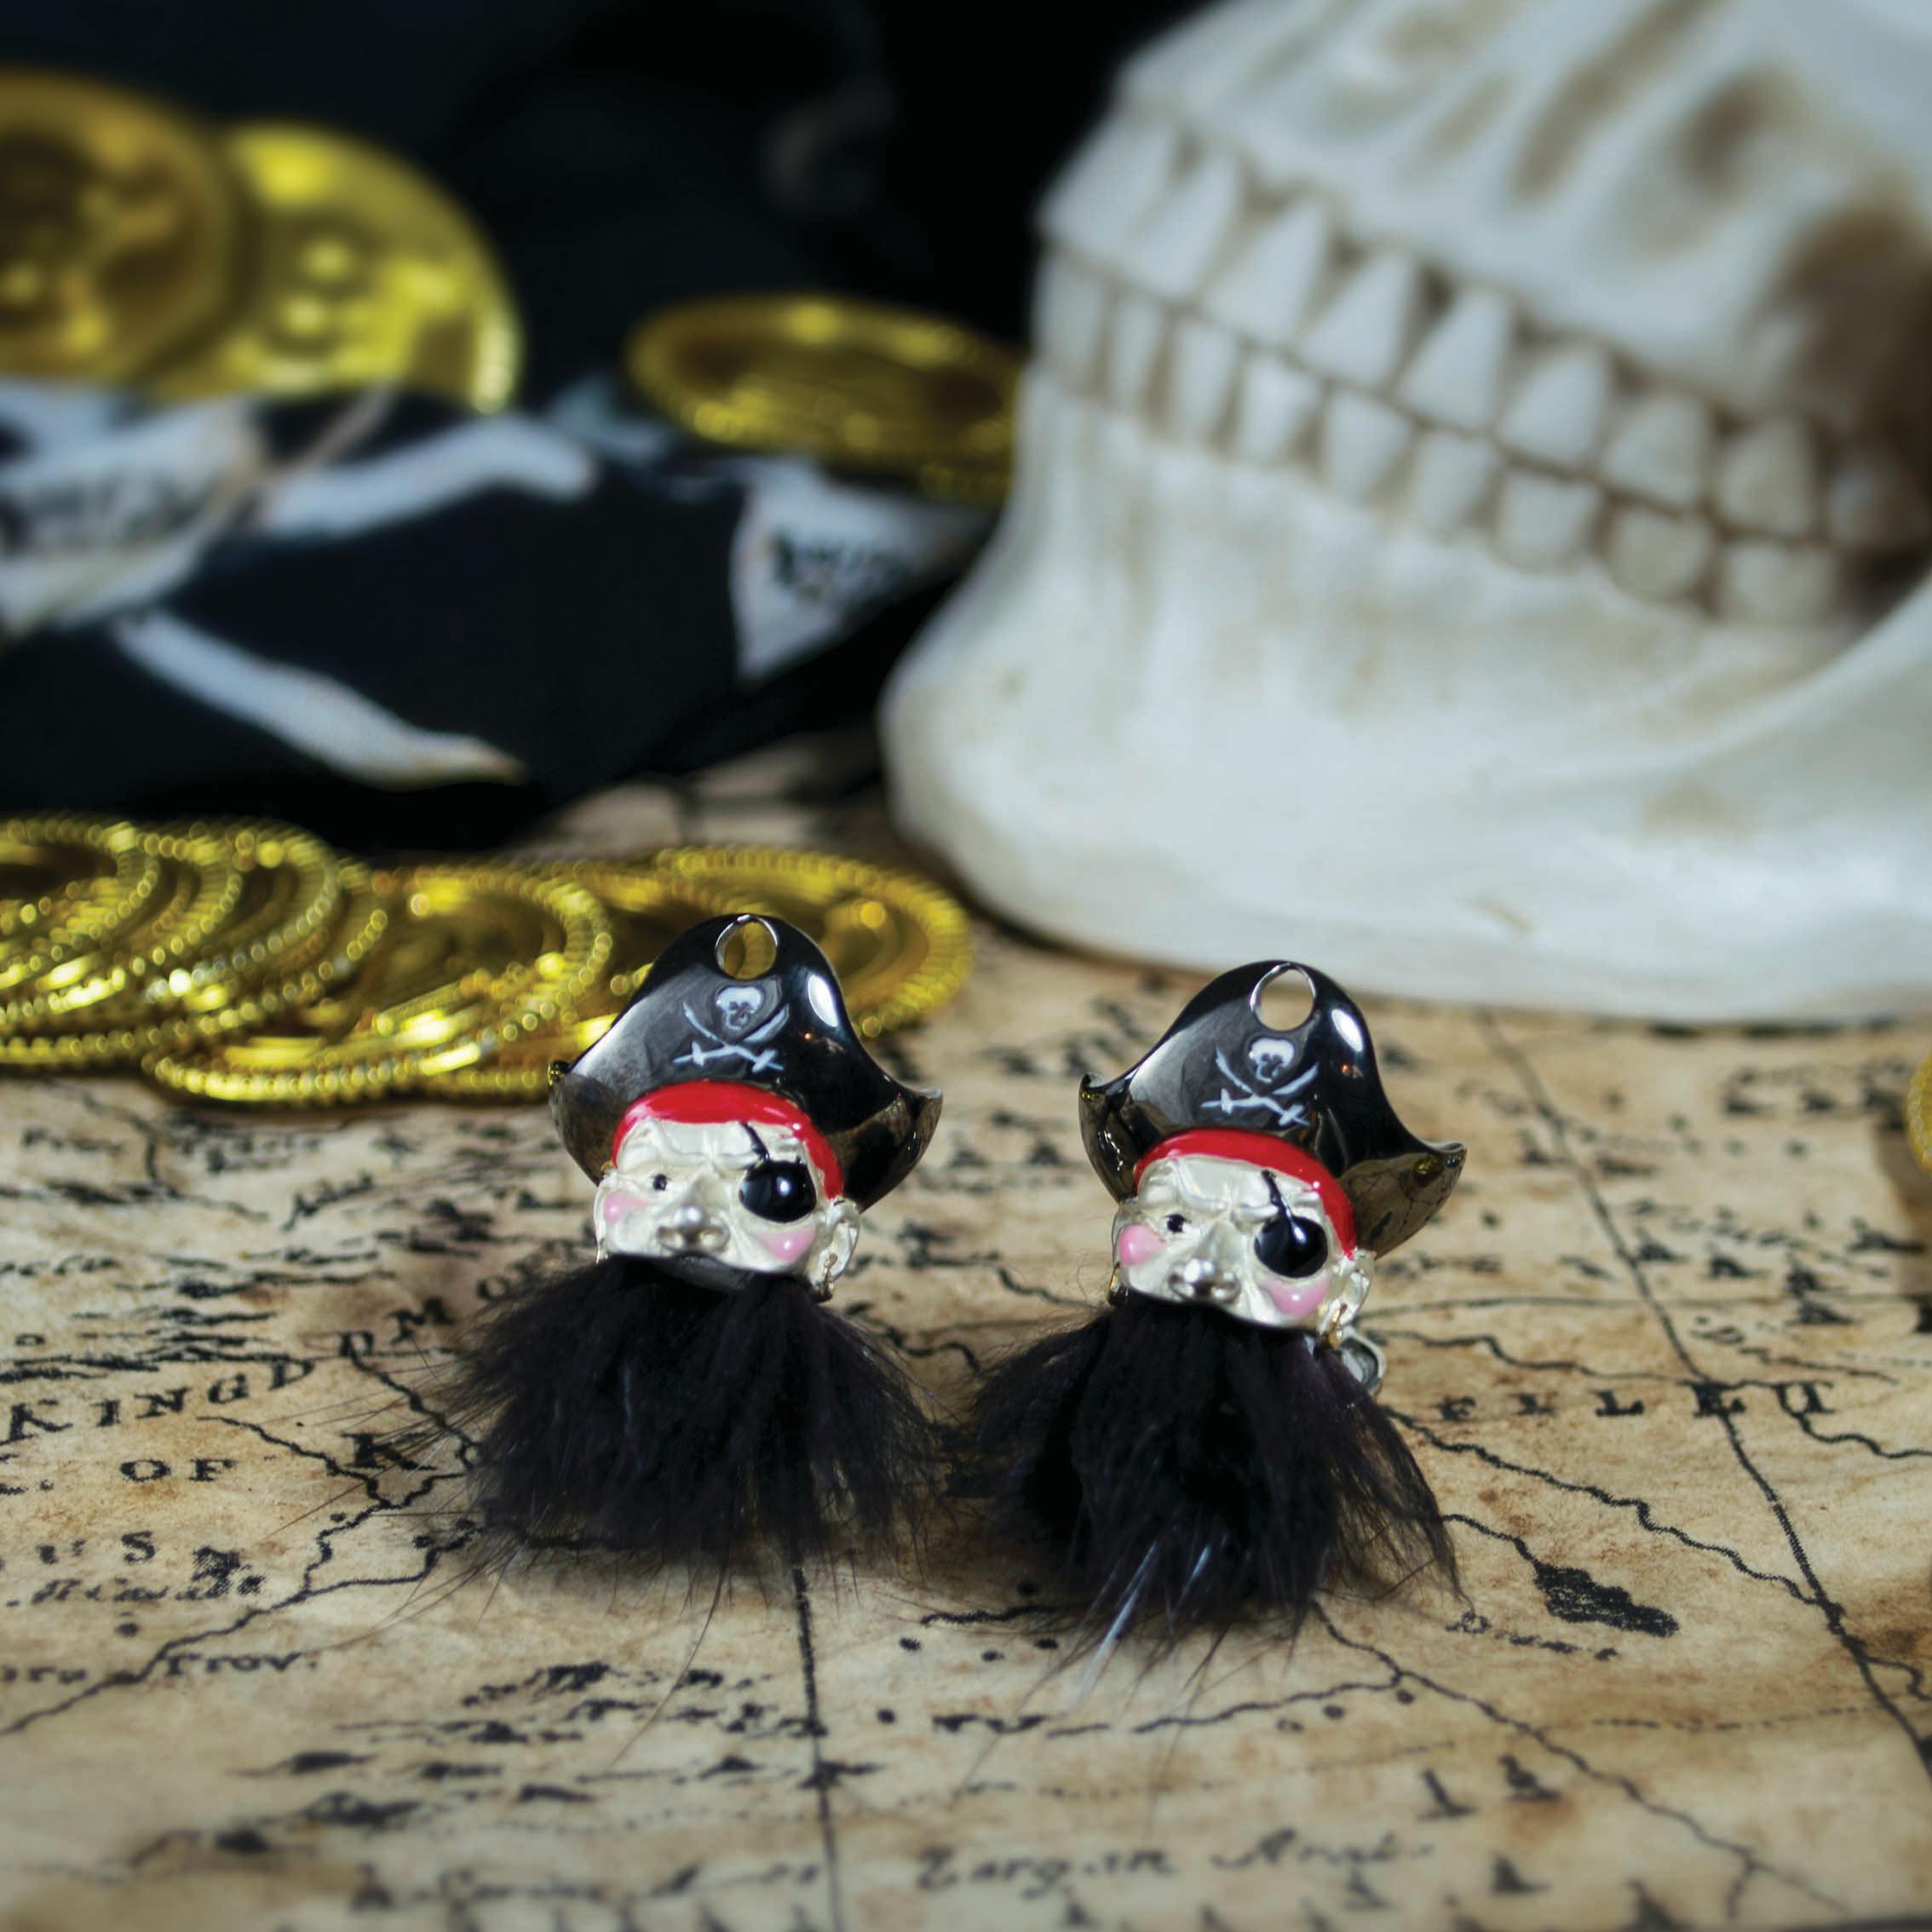 Shiver me timbers - these cufflinks are frightfully good! Made from Sterling Silver, these stunning pirate cufflinks feature a traditional black eye patch and pirate hat complete with skull and cross bones emblem on the front.
Perfectly finished off